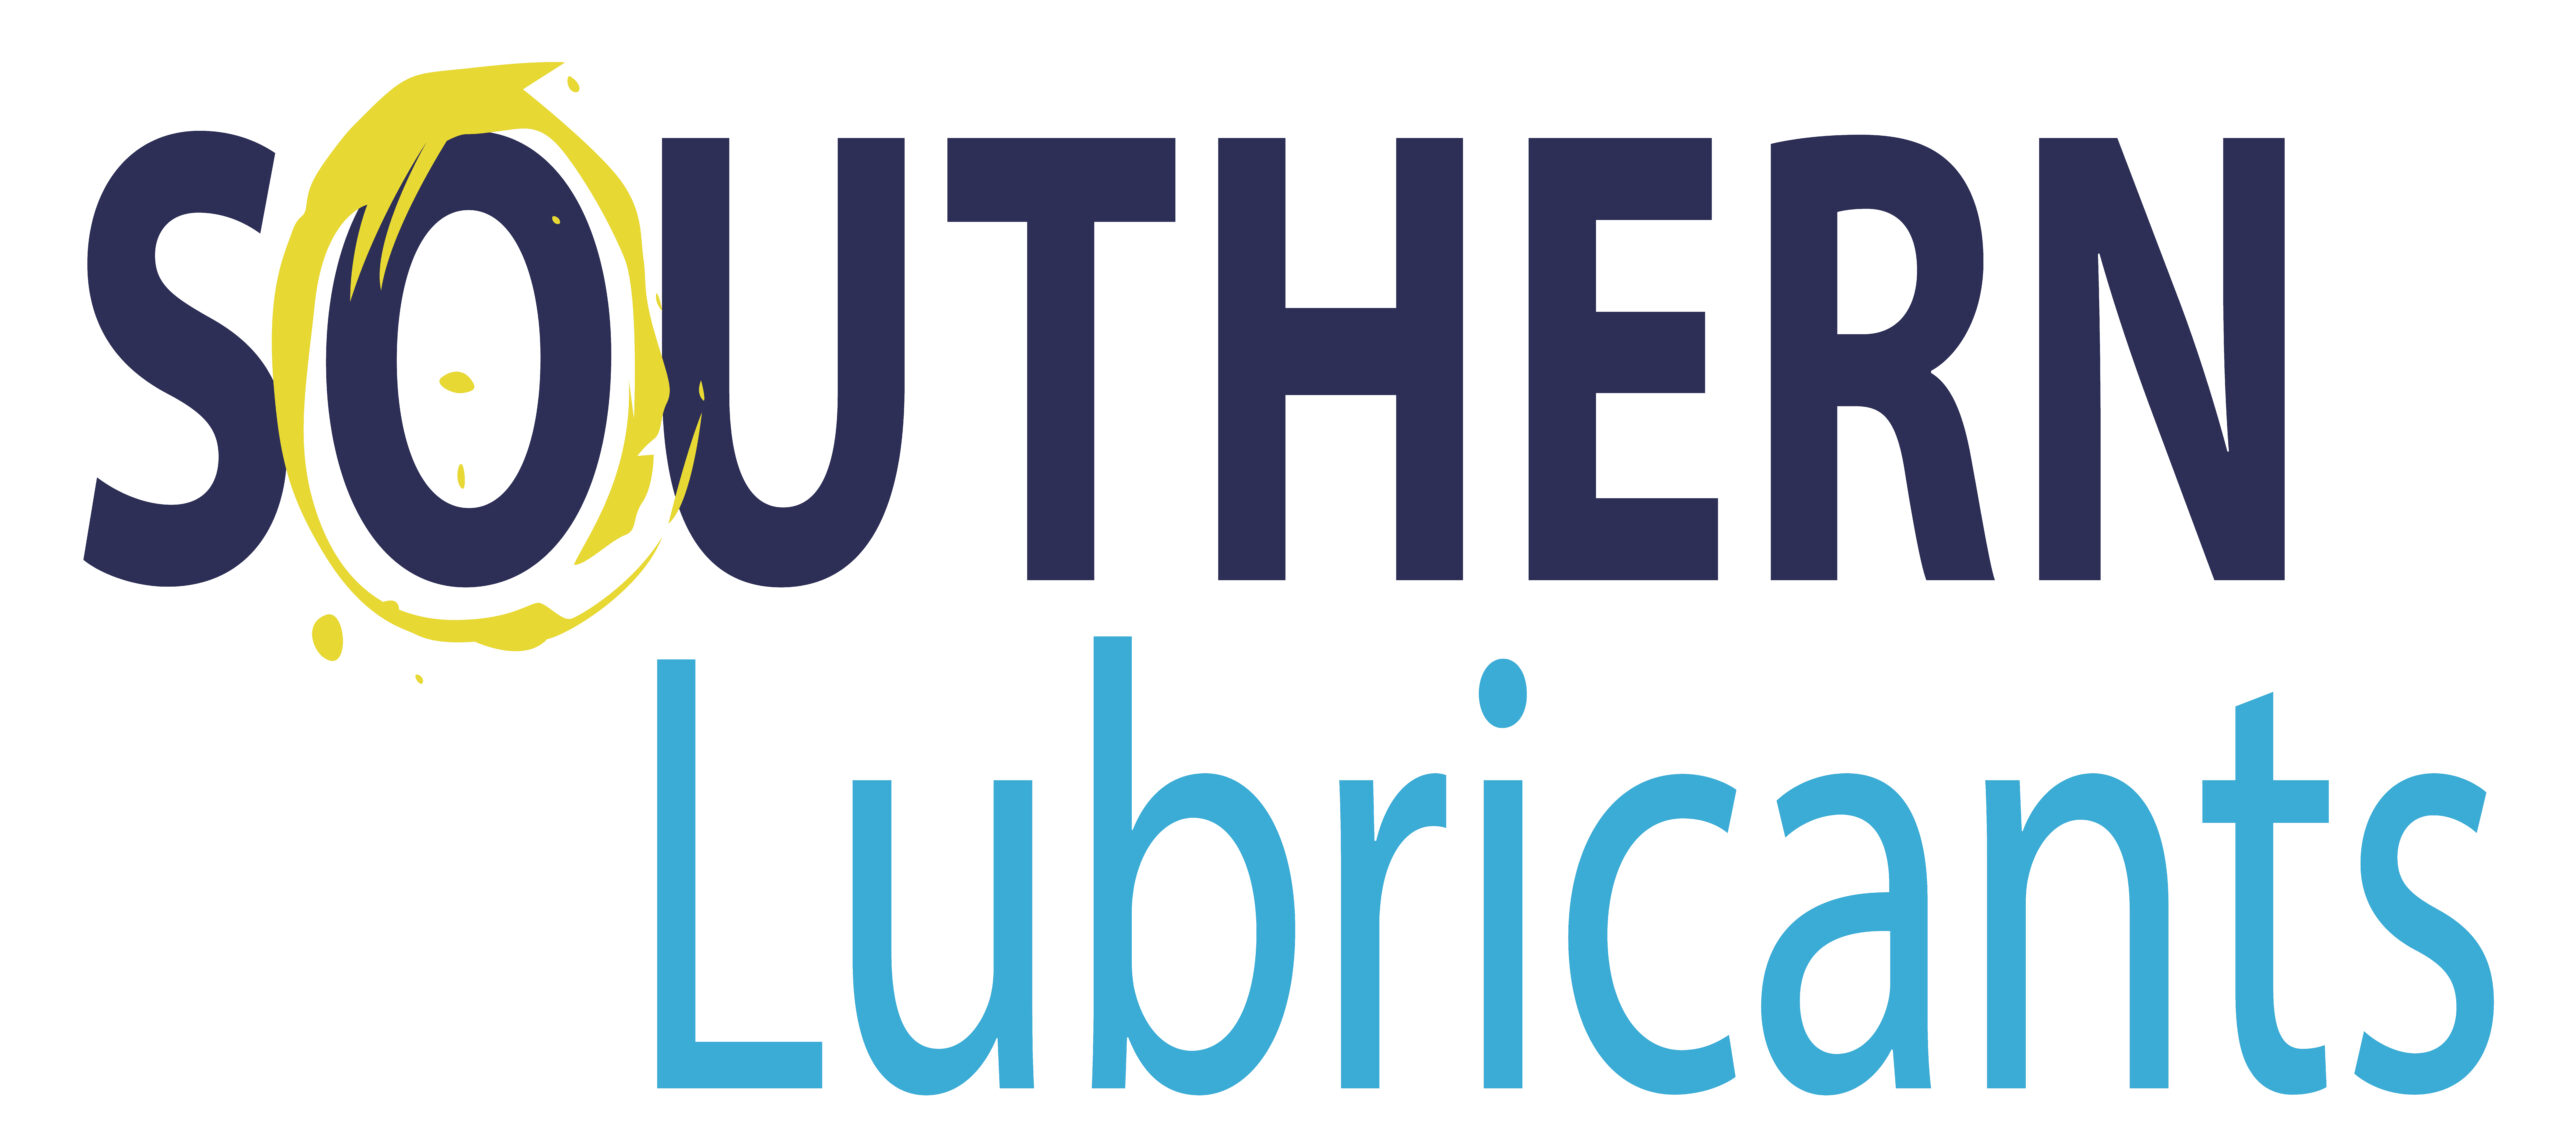 Sun Coast Resources, LLC Acquires Southern Lubricants, Inc.